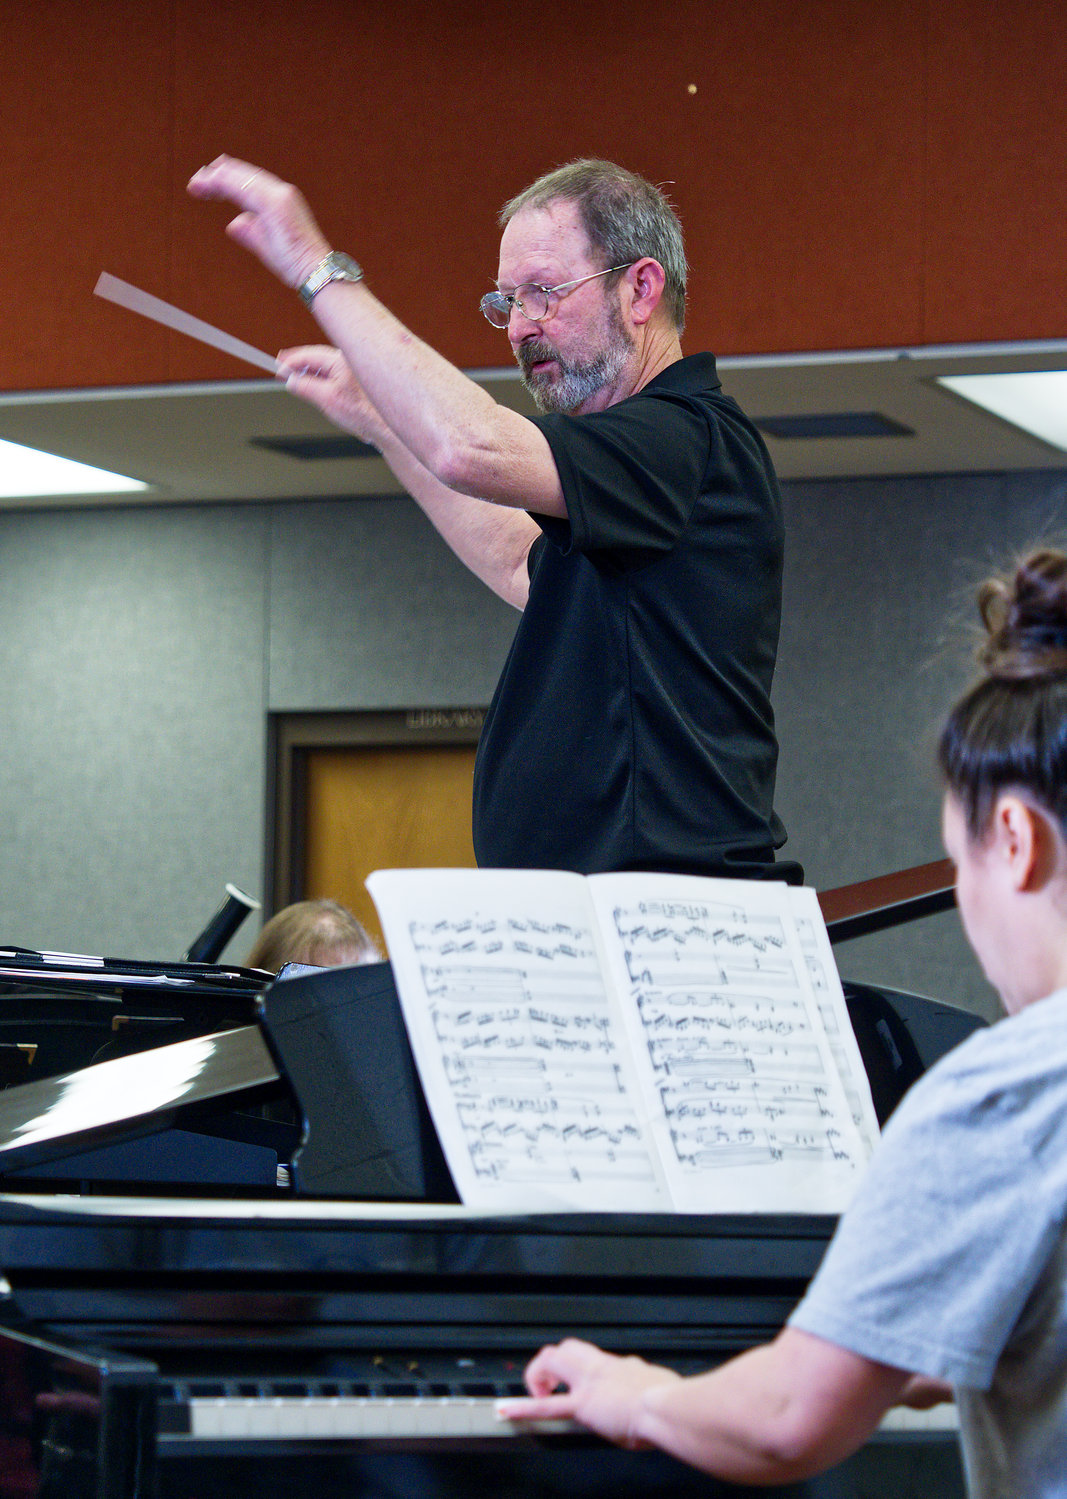 Jennifer Lynn Turner practices her solo from “Warsaw Concerto” as Mike Holbrook directs.